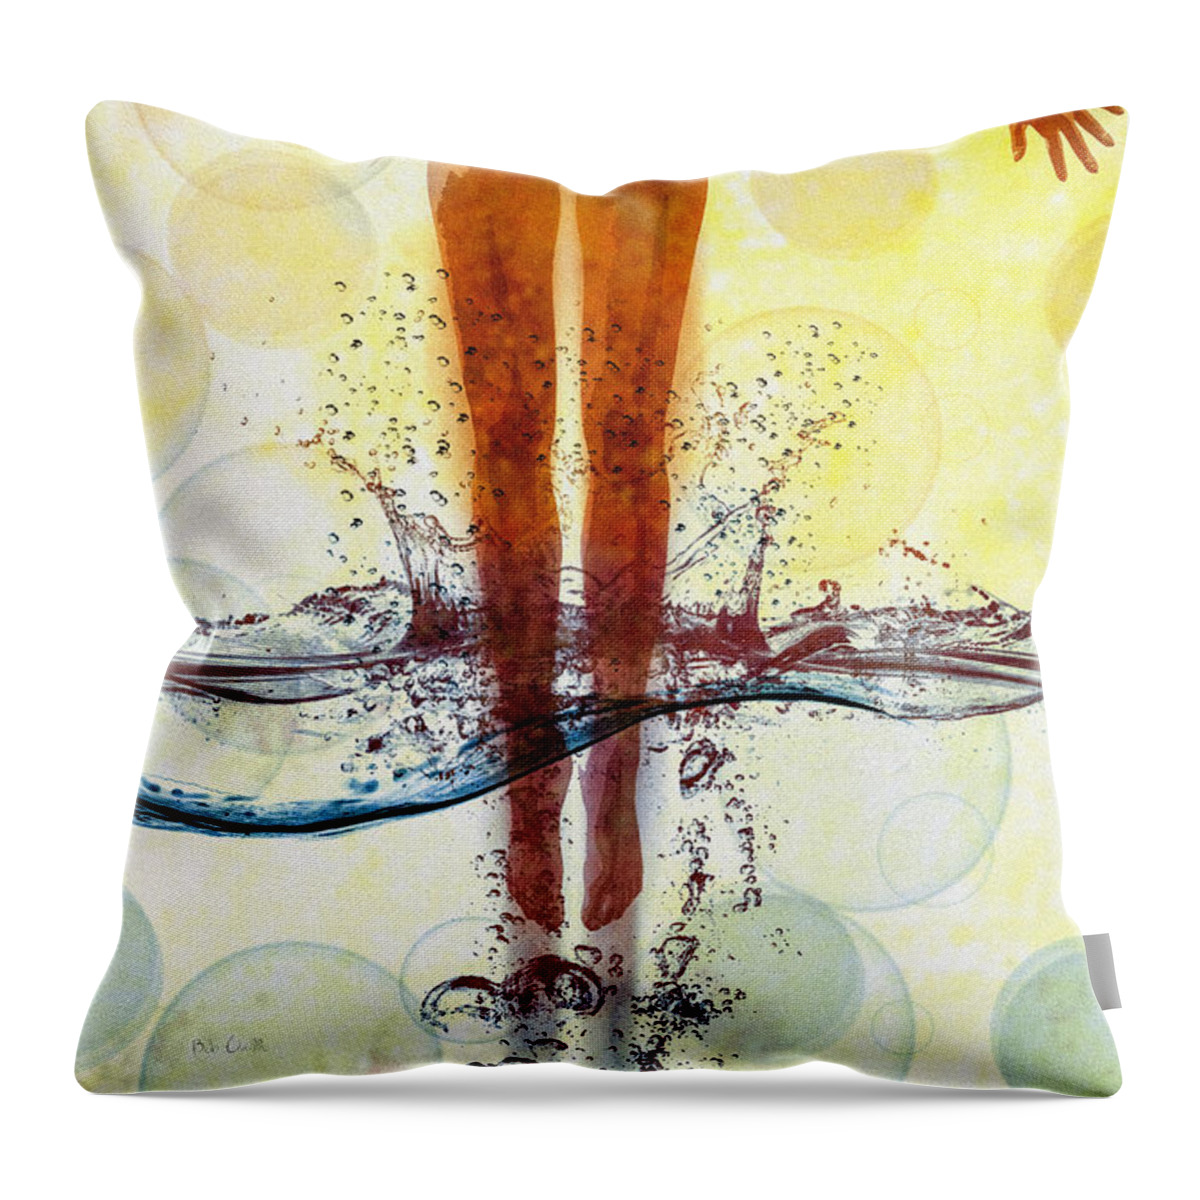 Splash Throw Pillow featuring the painting Skinny Dipping by Bob Orsillo